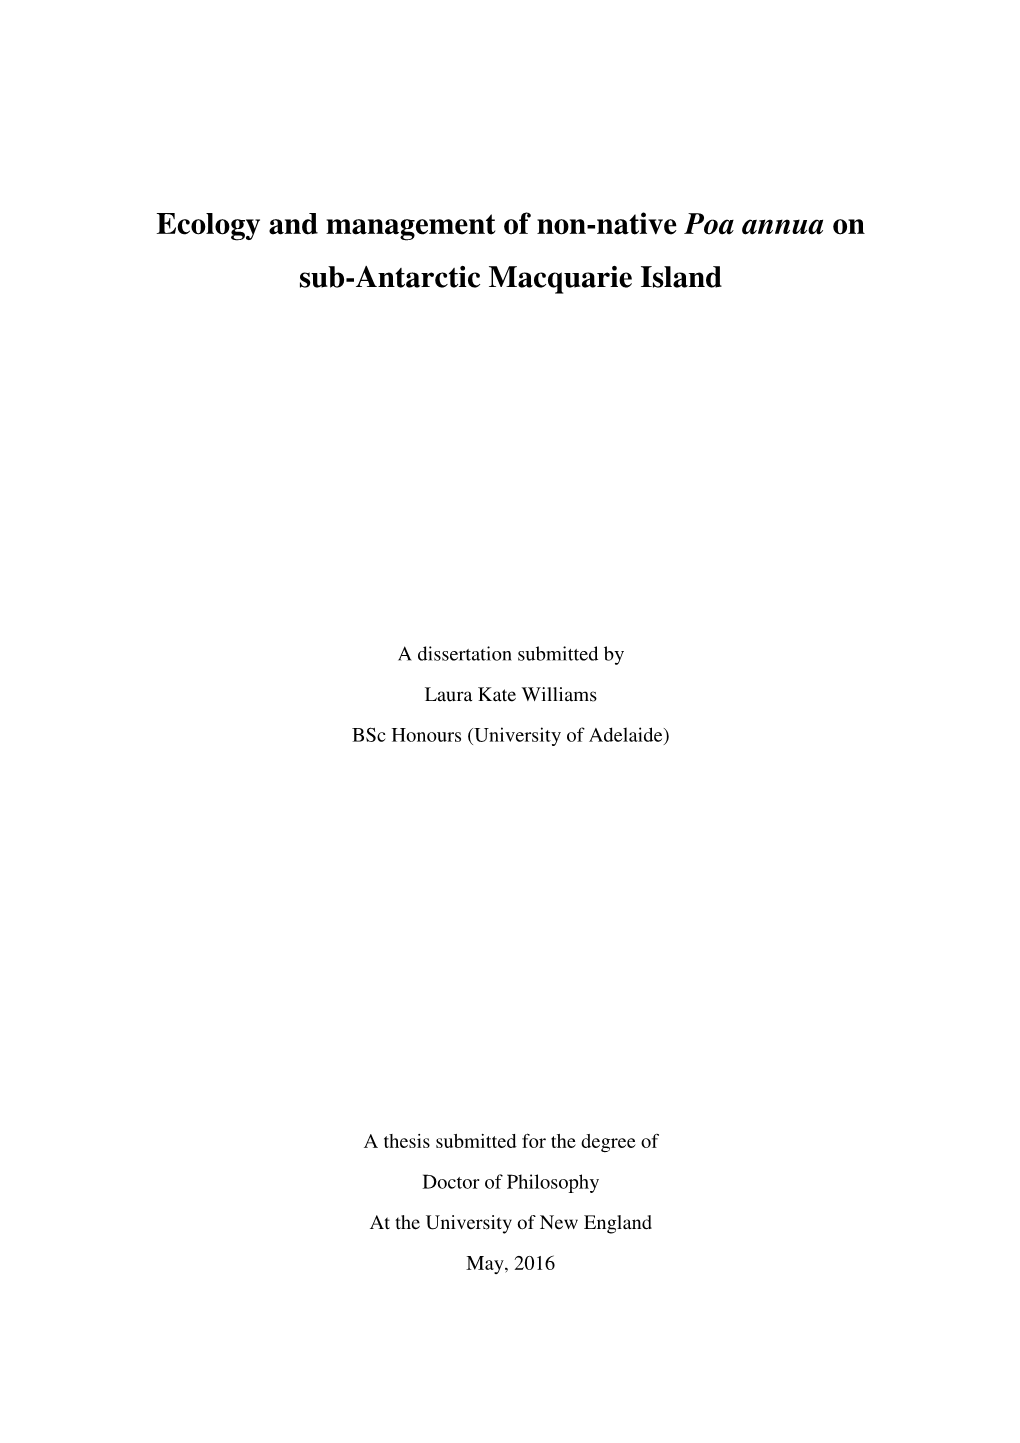 Ecology and Management of Non-Native Poa Annua on Sub-Antarctic Macquarie Island